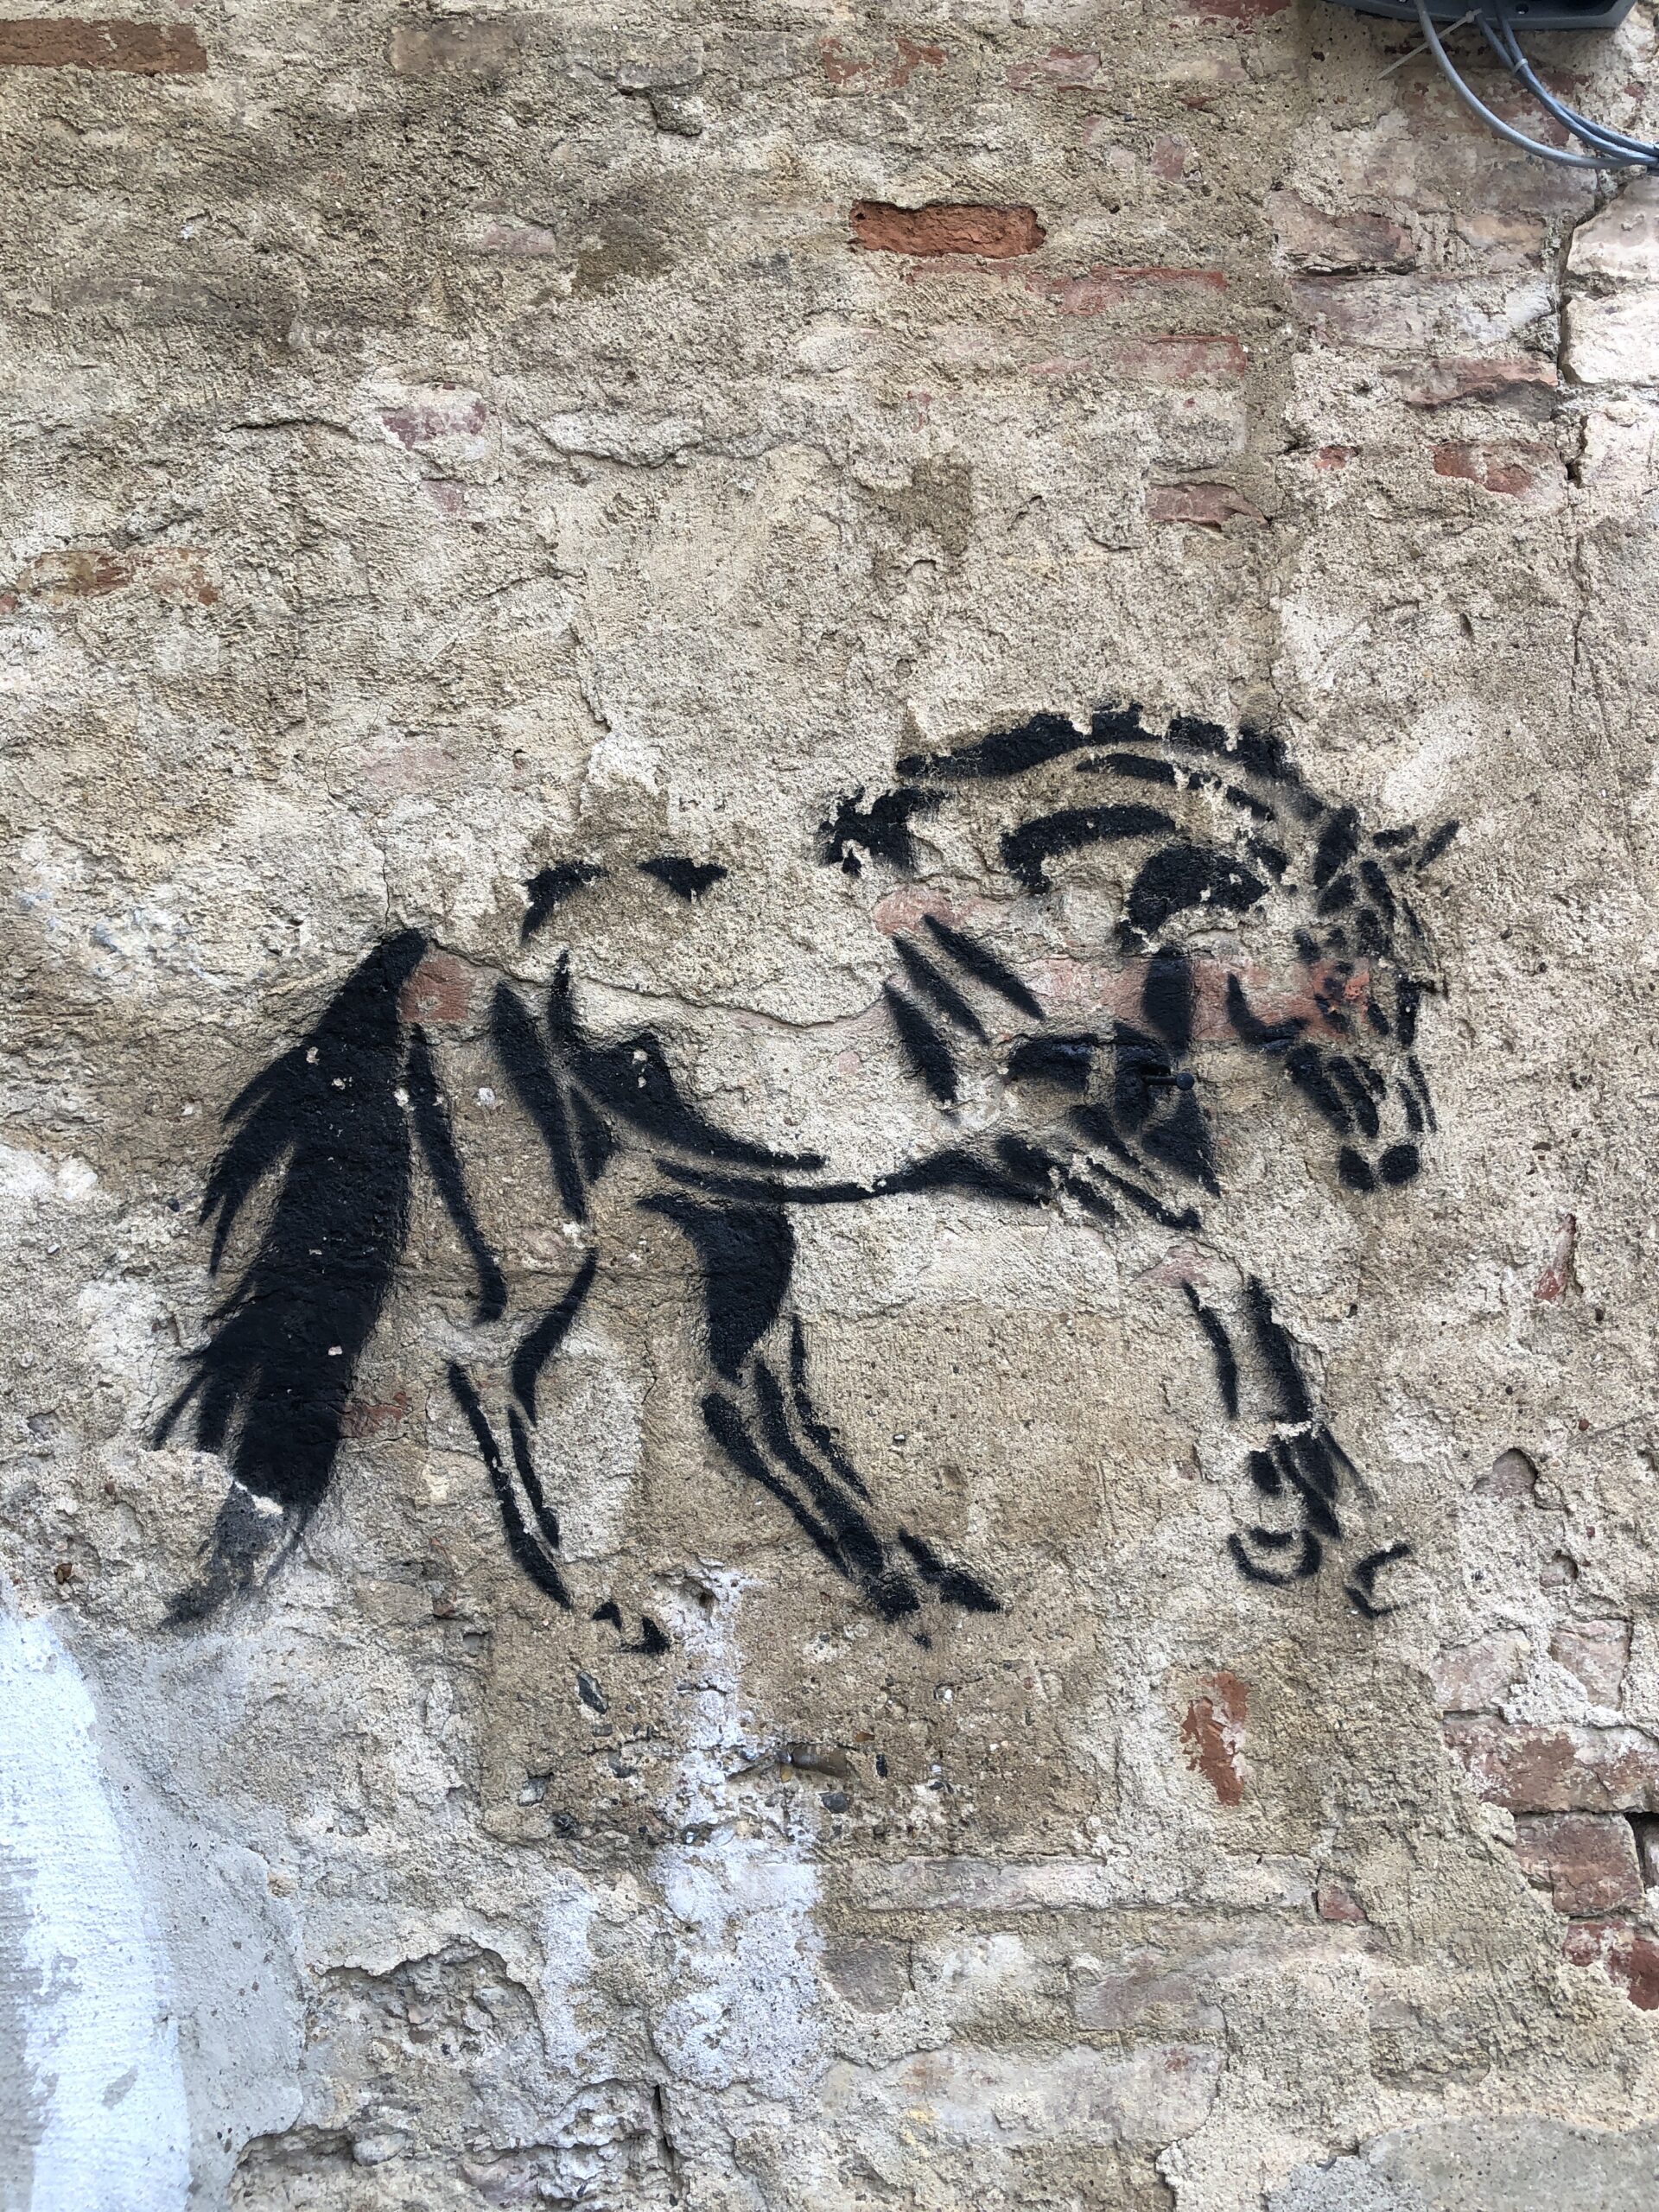 Horses and Horsey (Equine / Equestrian)Art in Siena